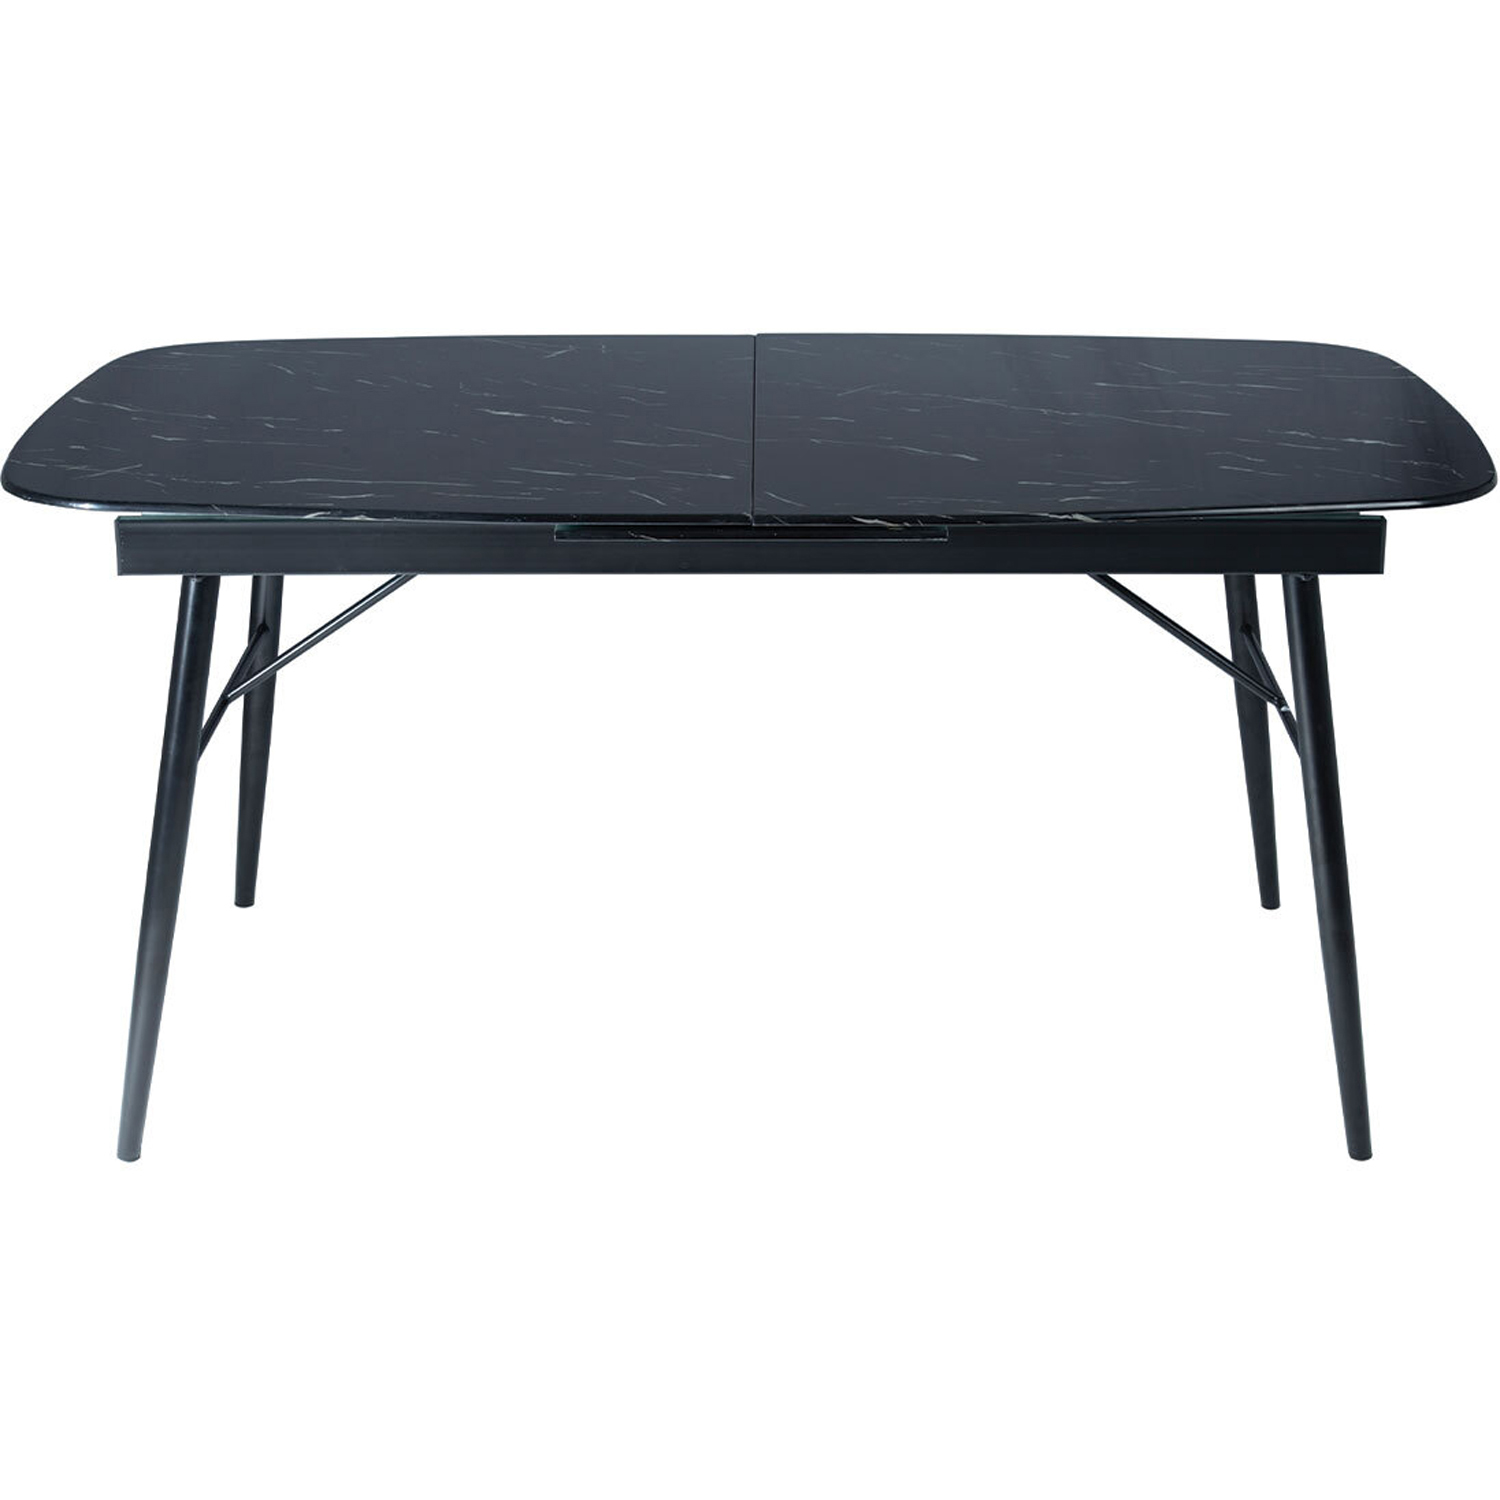 Sorrento Marble 6 Seater 160 to 200cm Extending Dining Table Black Image 2